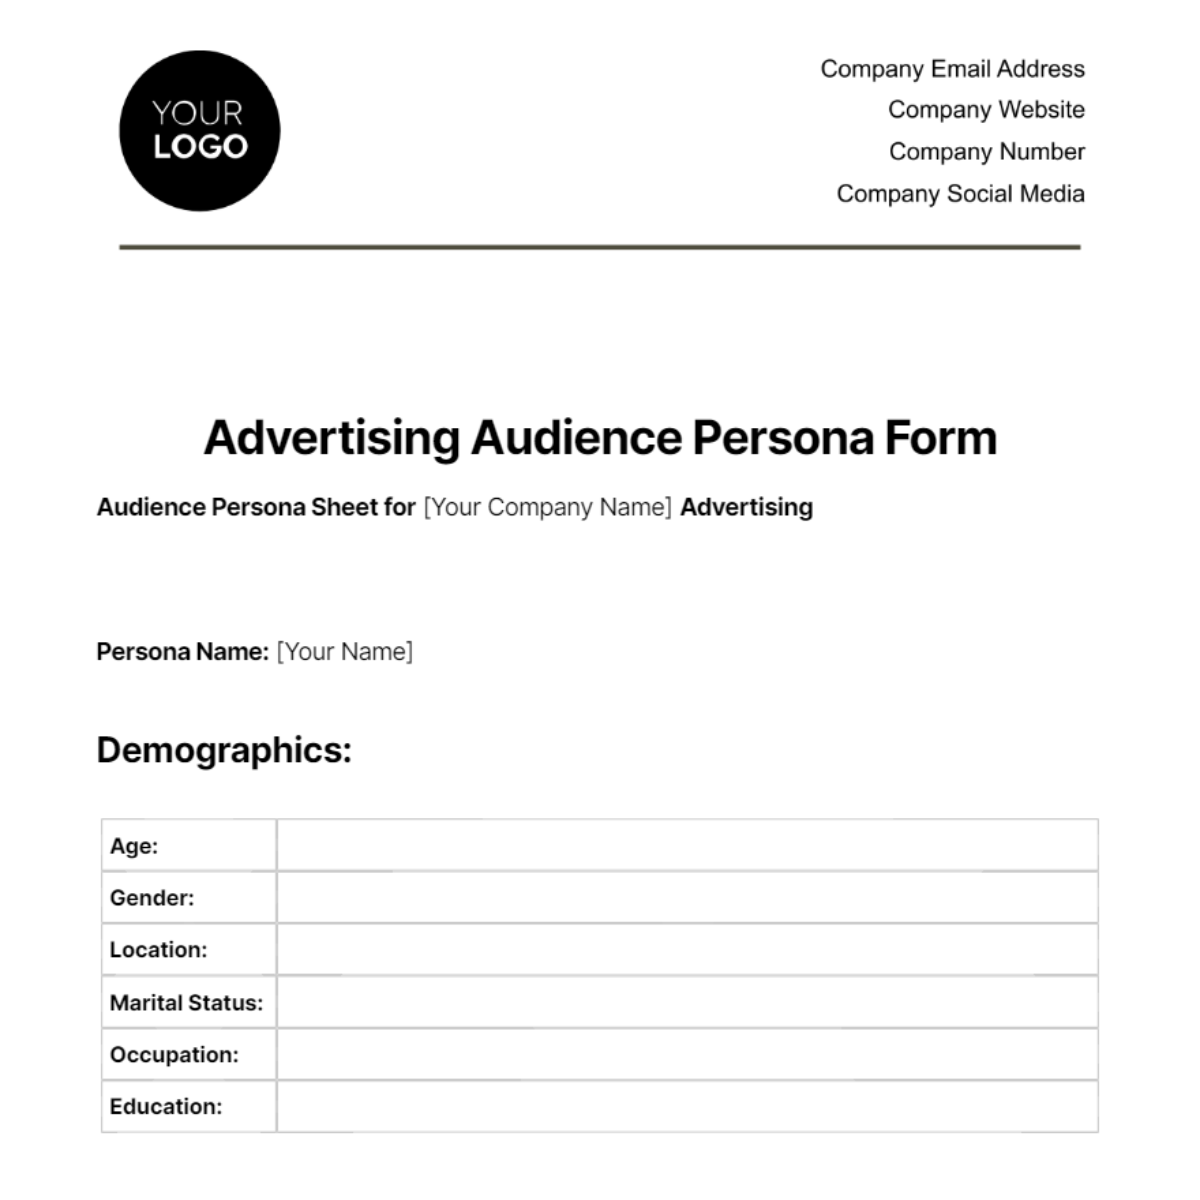 Advertising Audience Persona Form Template